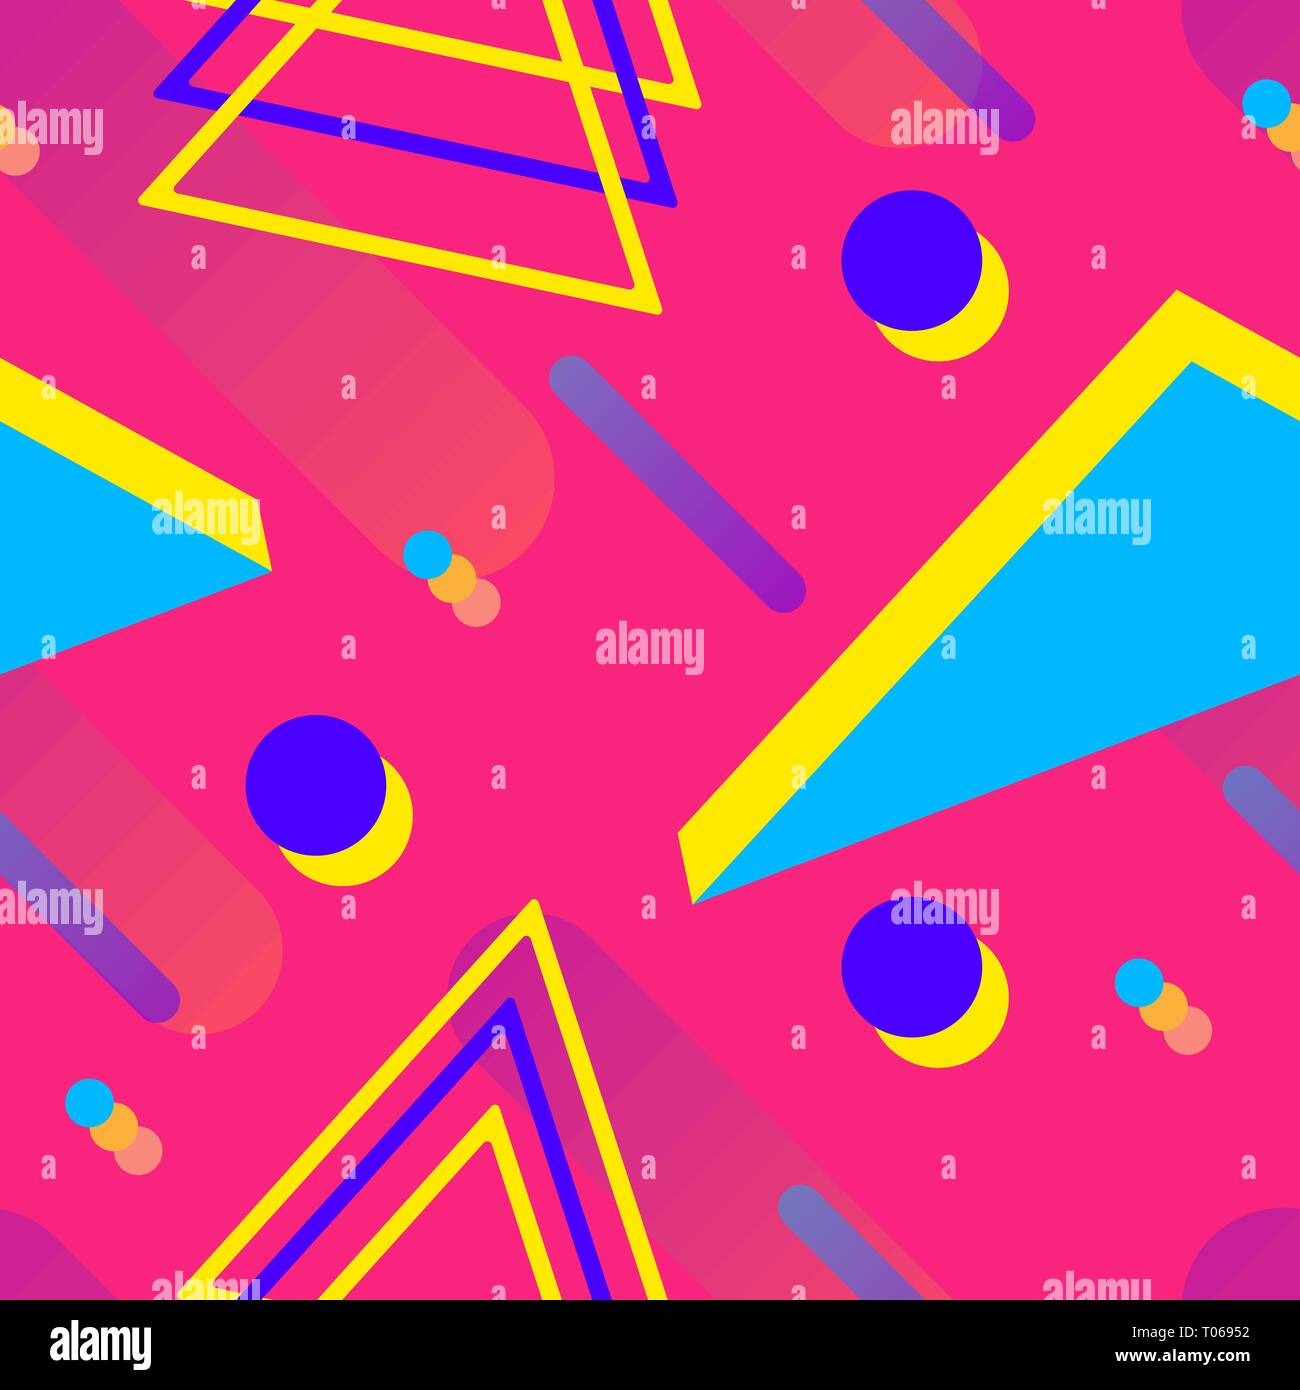 Vaporwave seamless 80's style pattern with geometric shapes. Colorful background with shapes, gradients and text. Stock Vector